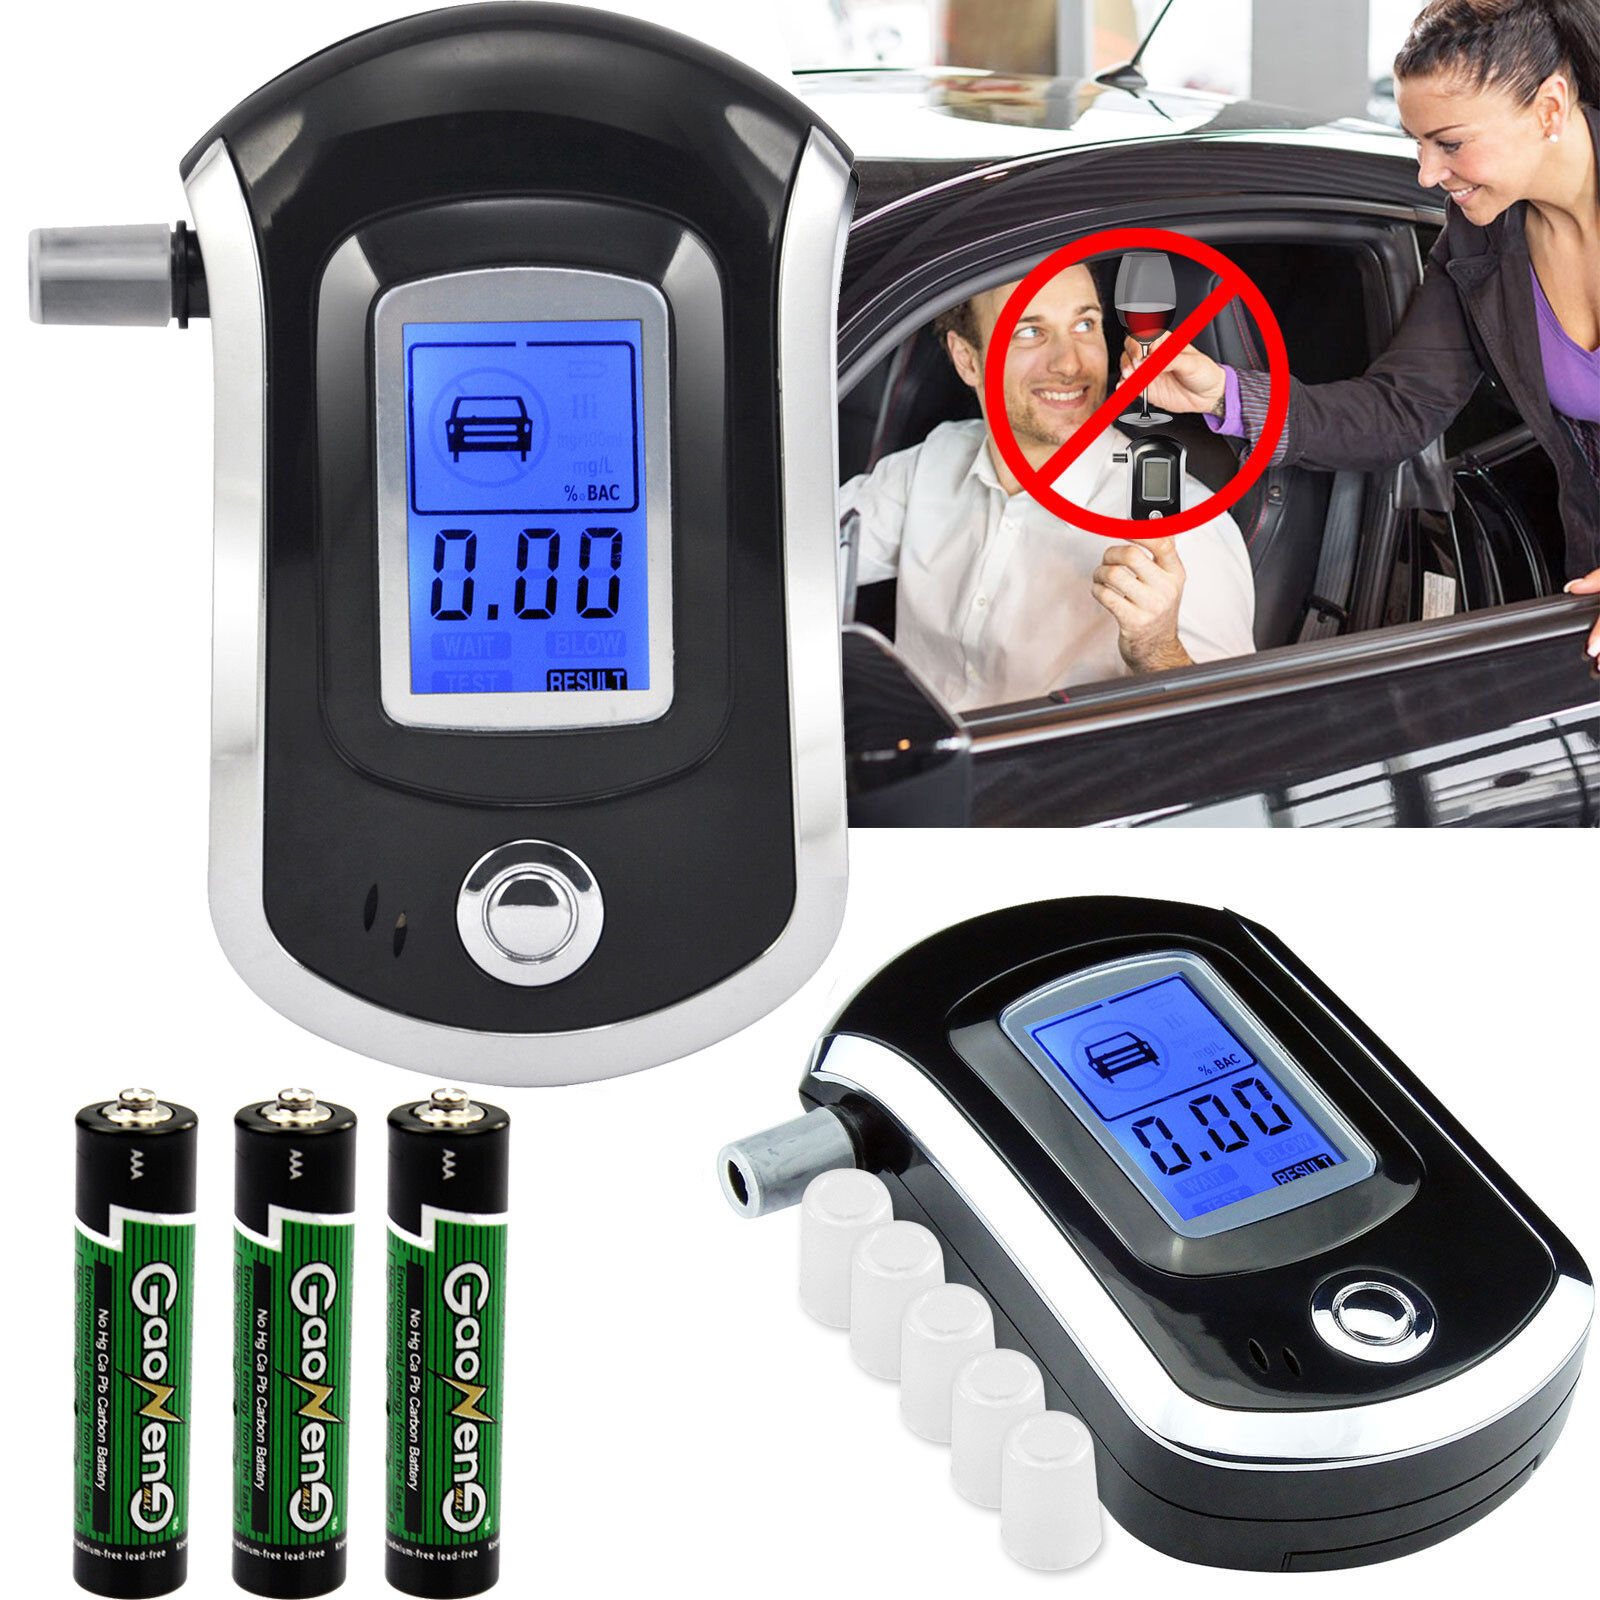 Advance Police Digital Breath Alcohol Tester LCD Breathalyzer Analyzer Detector Unbranded Does not apply